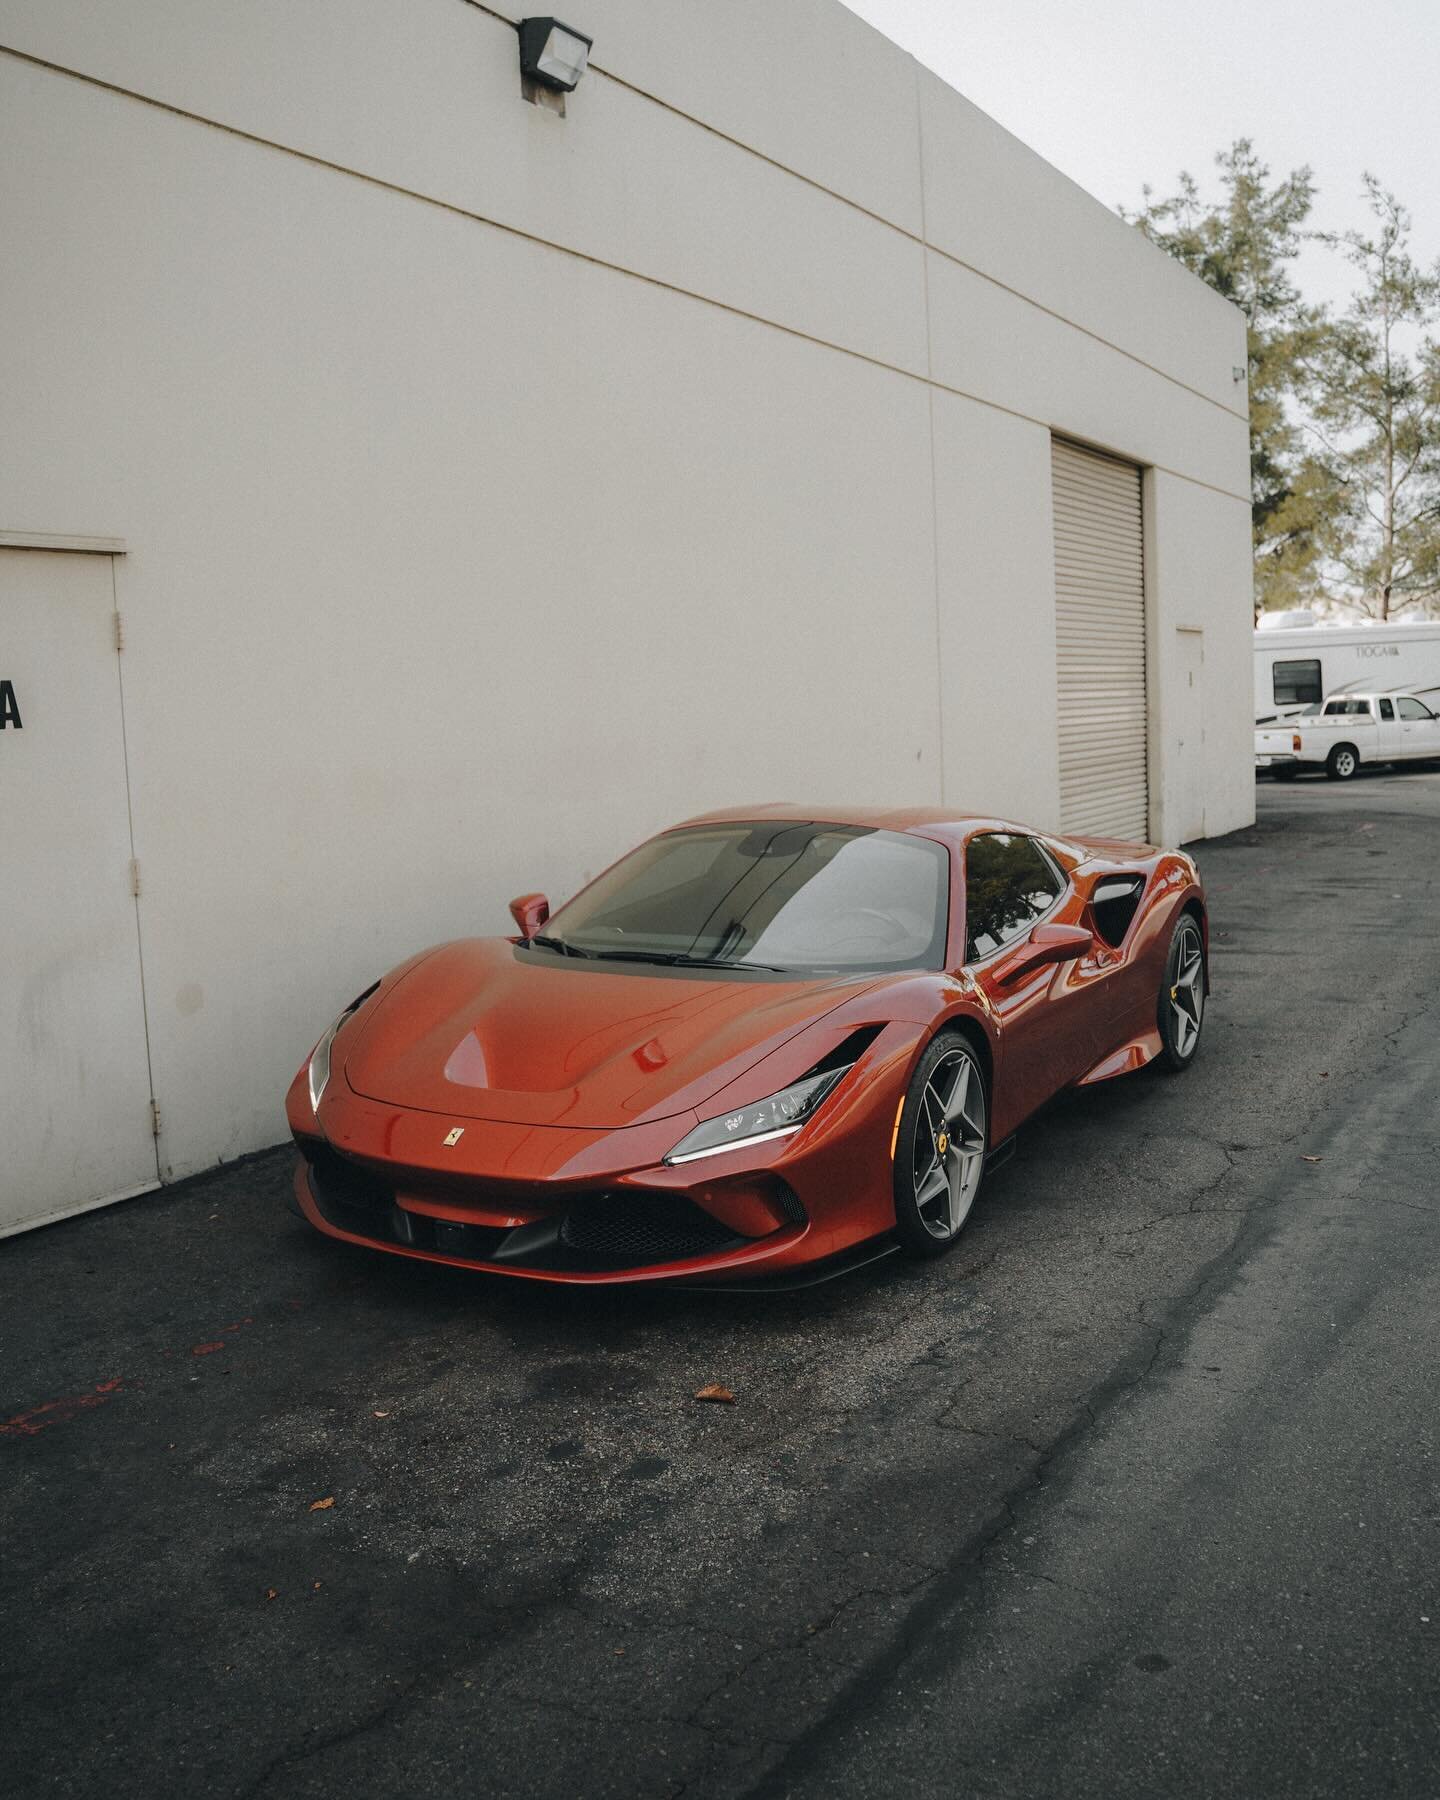 Sporting a darker red paint than a typical Ferrari, this Ferrari F8 came to us in search of front end protection. Applying our expertise with @XPEL PPF, we skillfully wrapped the front bumper, hood, fenders, headlights, and side mirrors in our protec